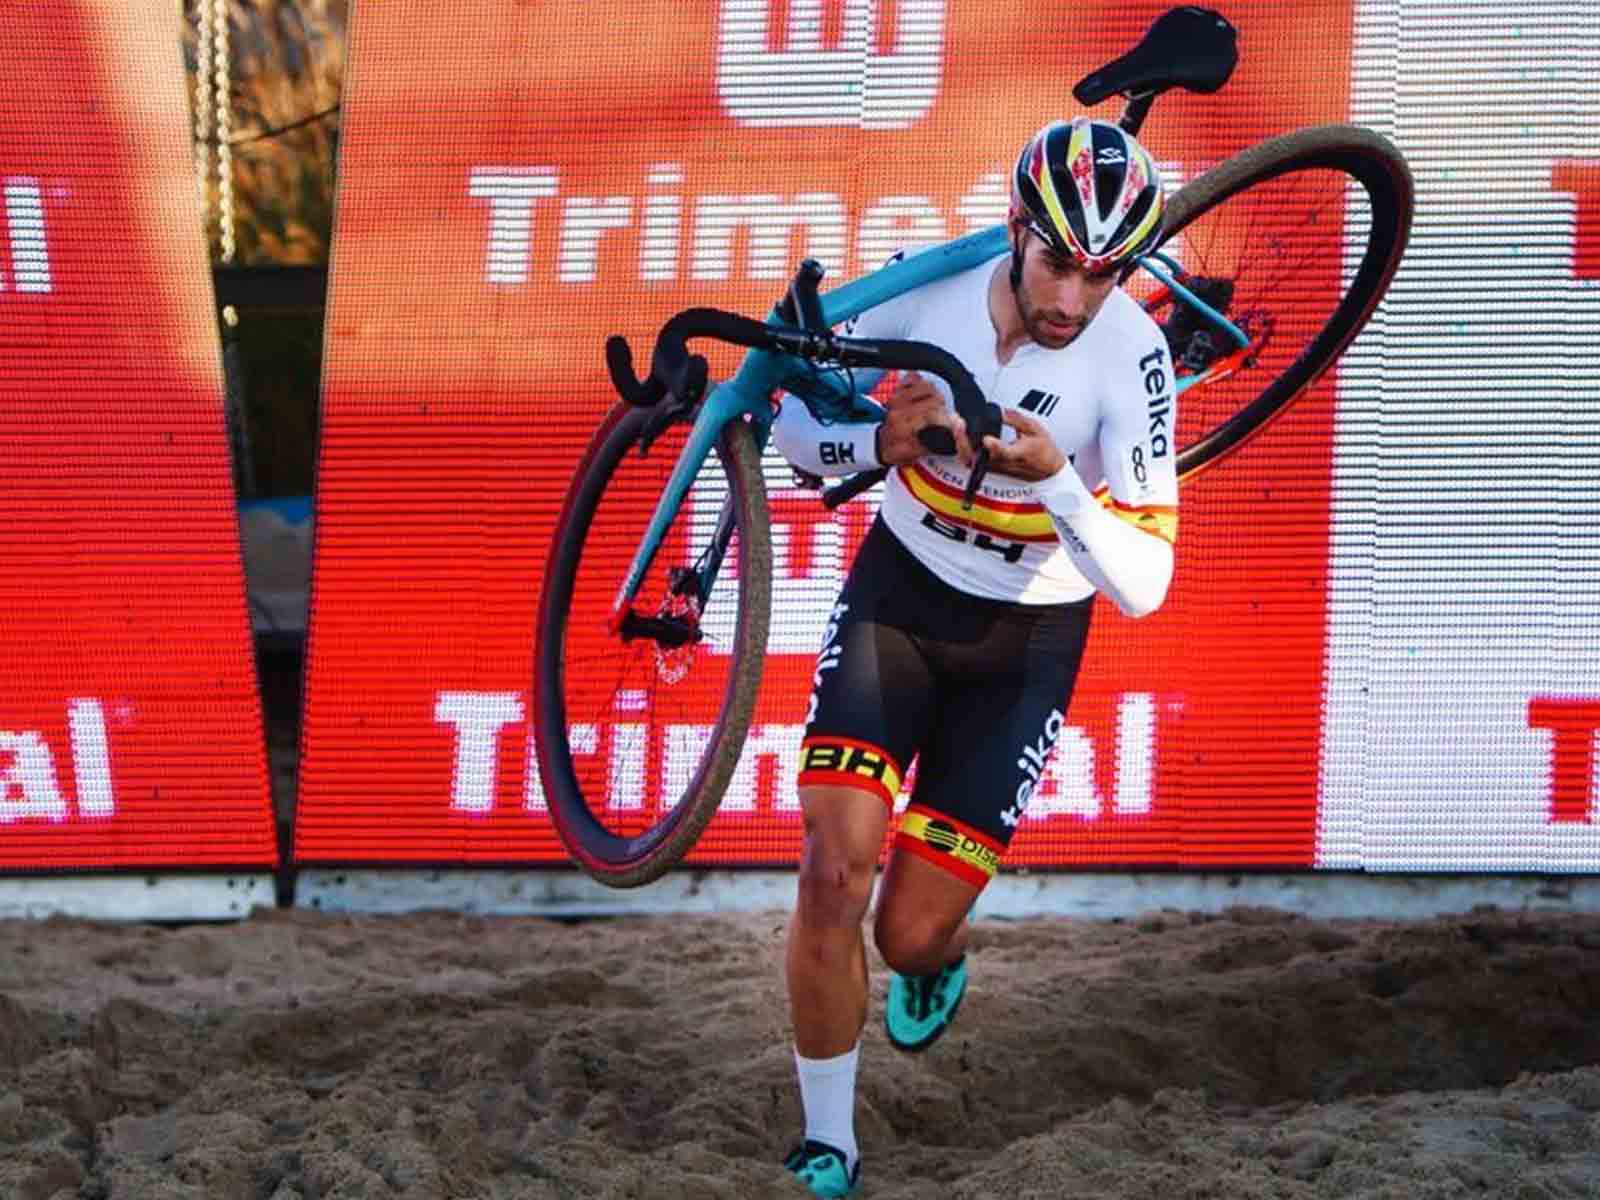 FELIPE ORTS AND THE UNSTOPABLE TEIKA TEAM IN CX